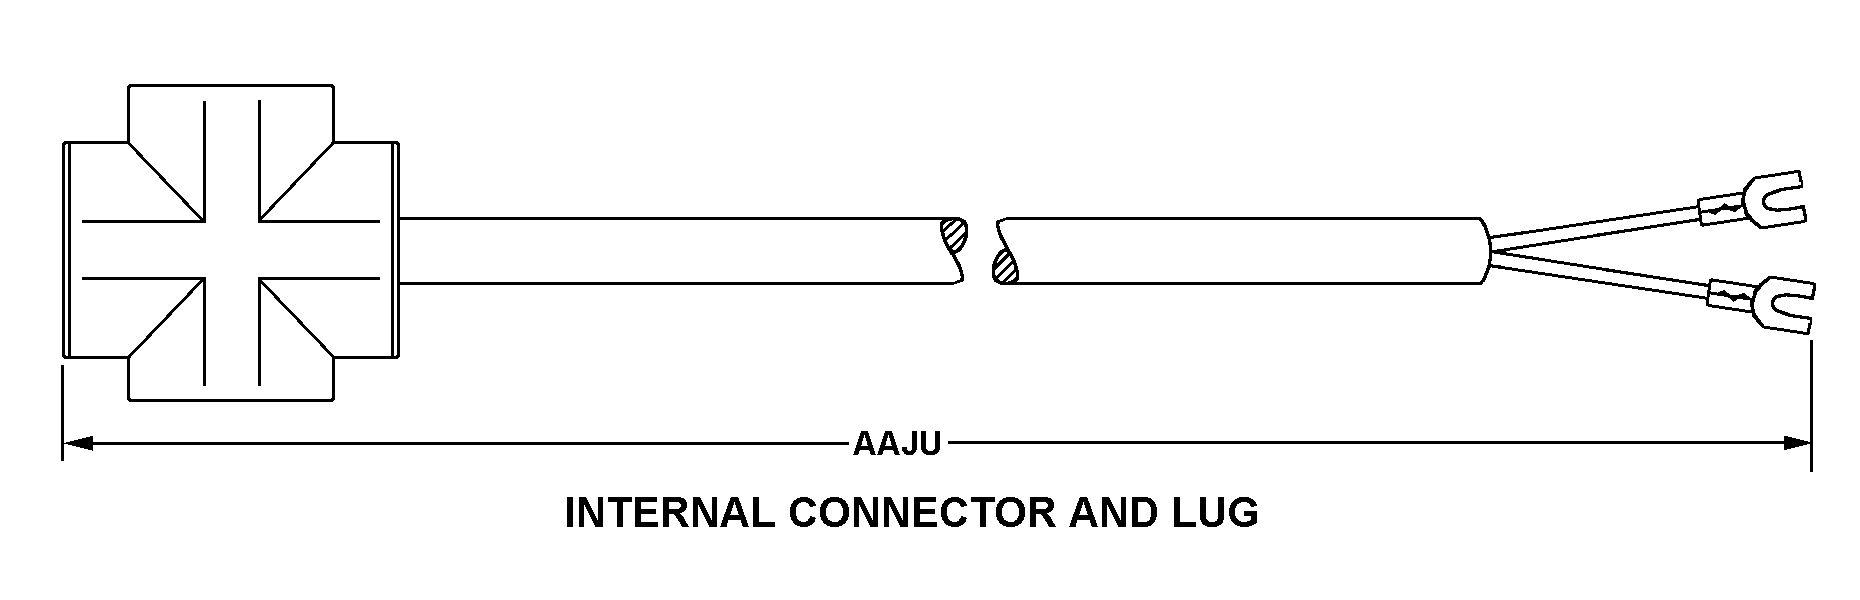 INTERNAL CONNECTOR AND LUG style nsn 5995-00-841-6615